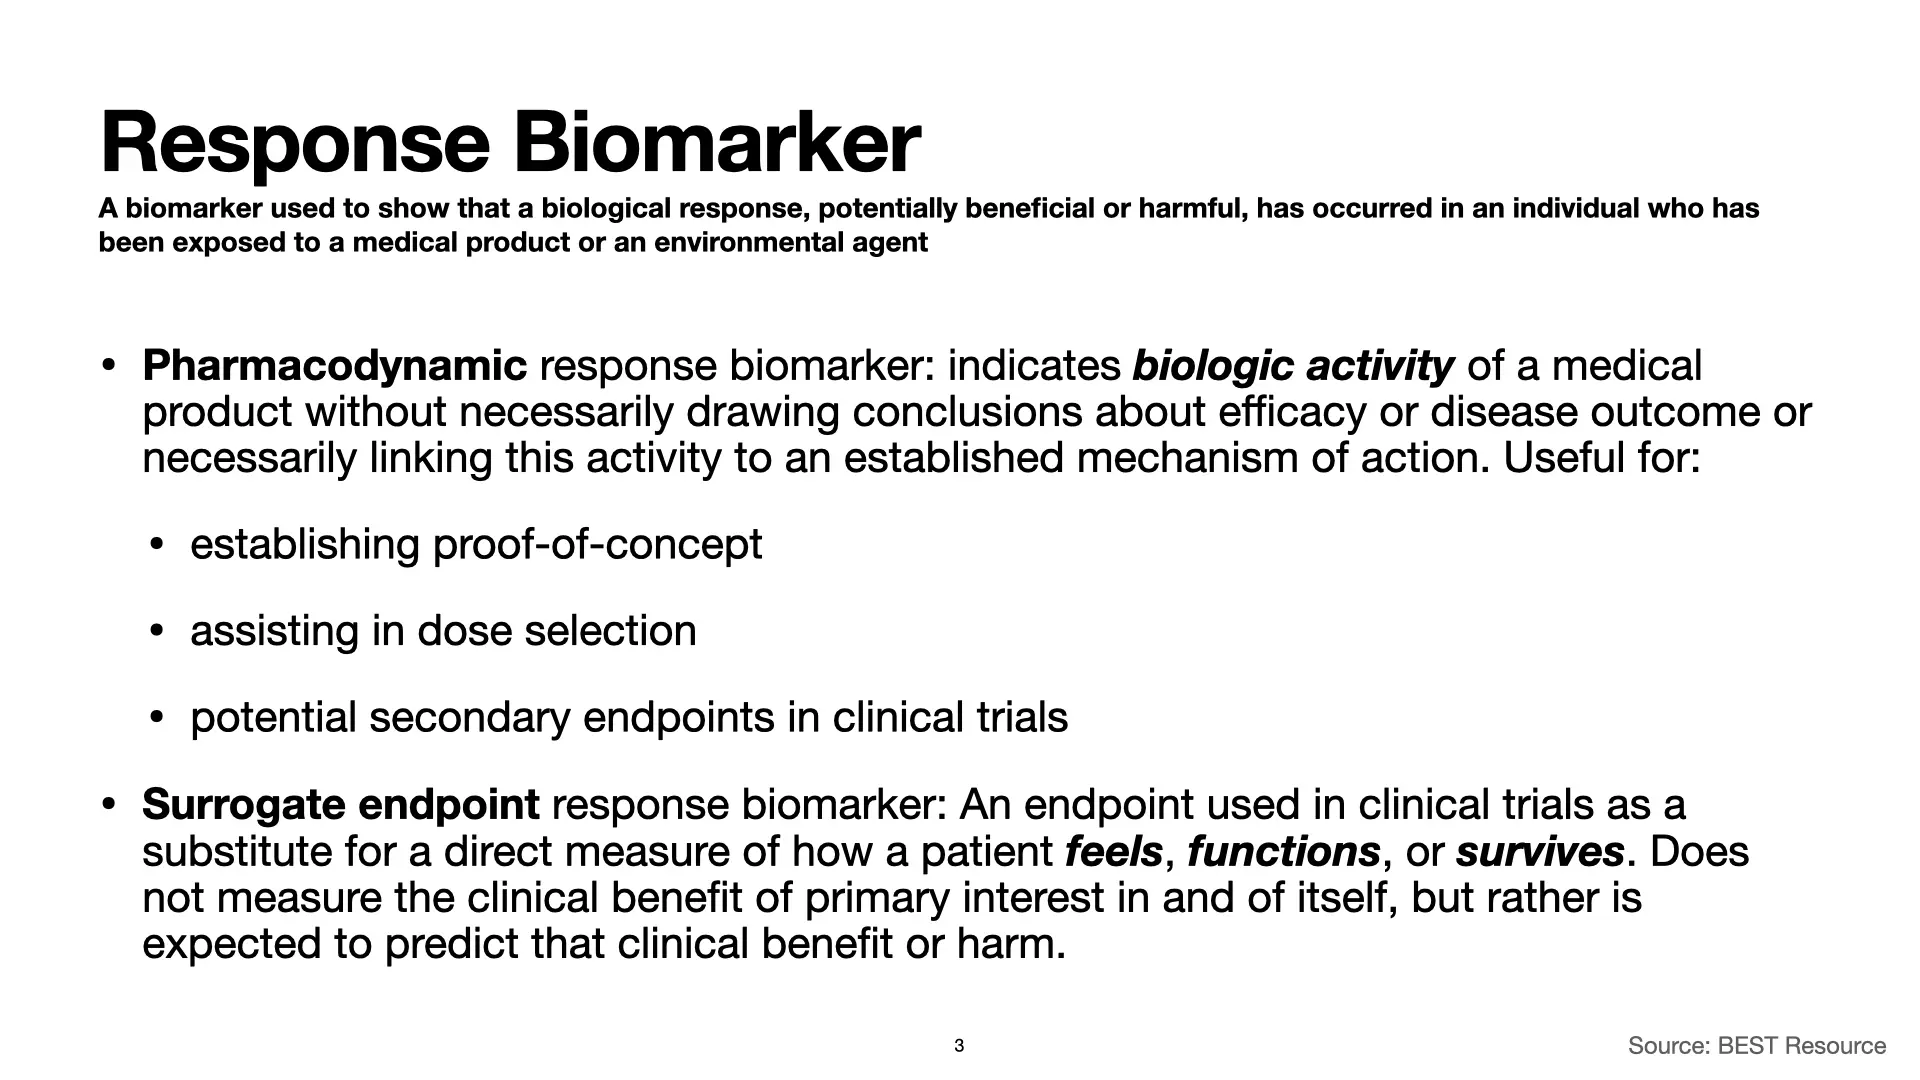 Slide 3: Response Biomarker: A biomarker used to show that a biological response, potentially beneficial or harmful, has occurred in an individual who has been exposed to a medical product or an environmental agent. Pharmacodynamic response biomarker: indicates biologic activity of a medical product without necessarily drawing conclusions about efficacy or disease outcome or necessarily linking this activity to an established mechanism of action. Useful for: establishing proof-of-concept, assisting in dose selection, and as potential secondary endpoints in clinical trials. Surrogate endpoint response biomarker: An endpoint used in clinical trials as a substitute for a direct measure of how a patient feels, functions, or survives. Does not measure the clinical benefit of primary interest in and of itself, but rather is expected to predict that clinical benefit or harm. Source: BEST Resource.